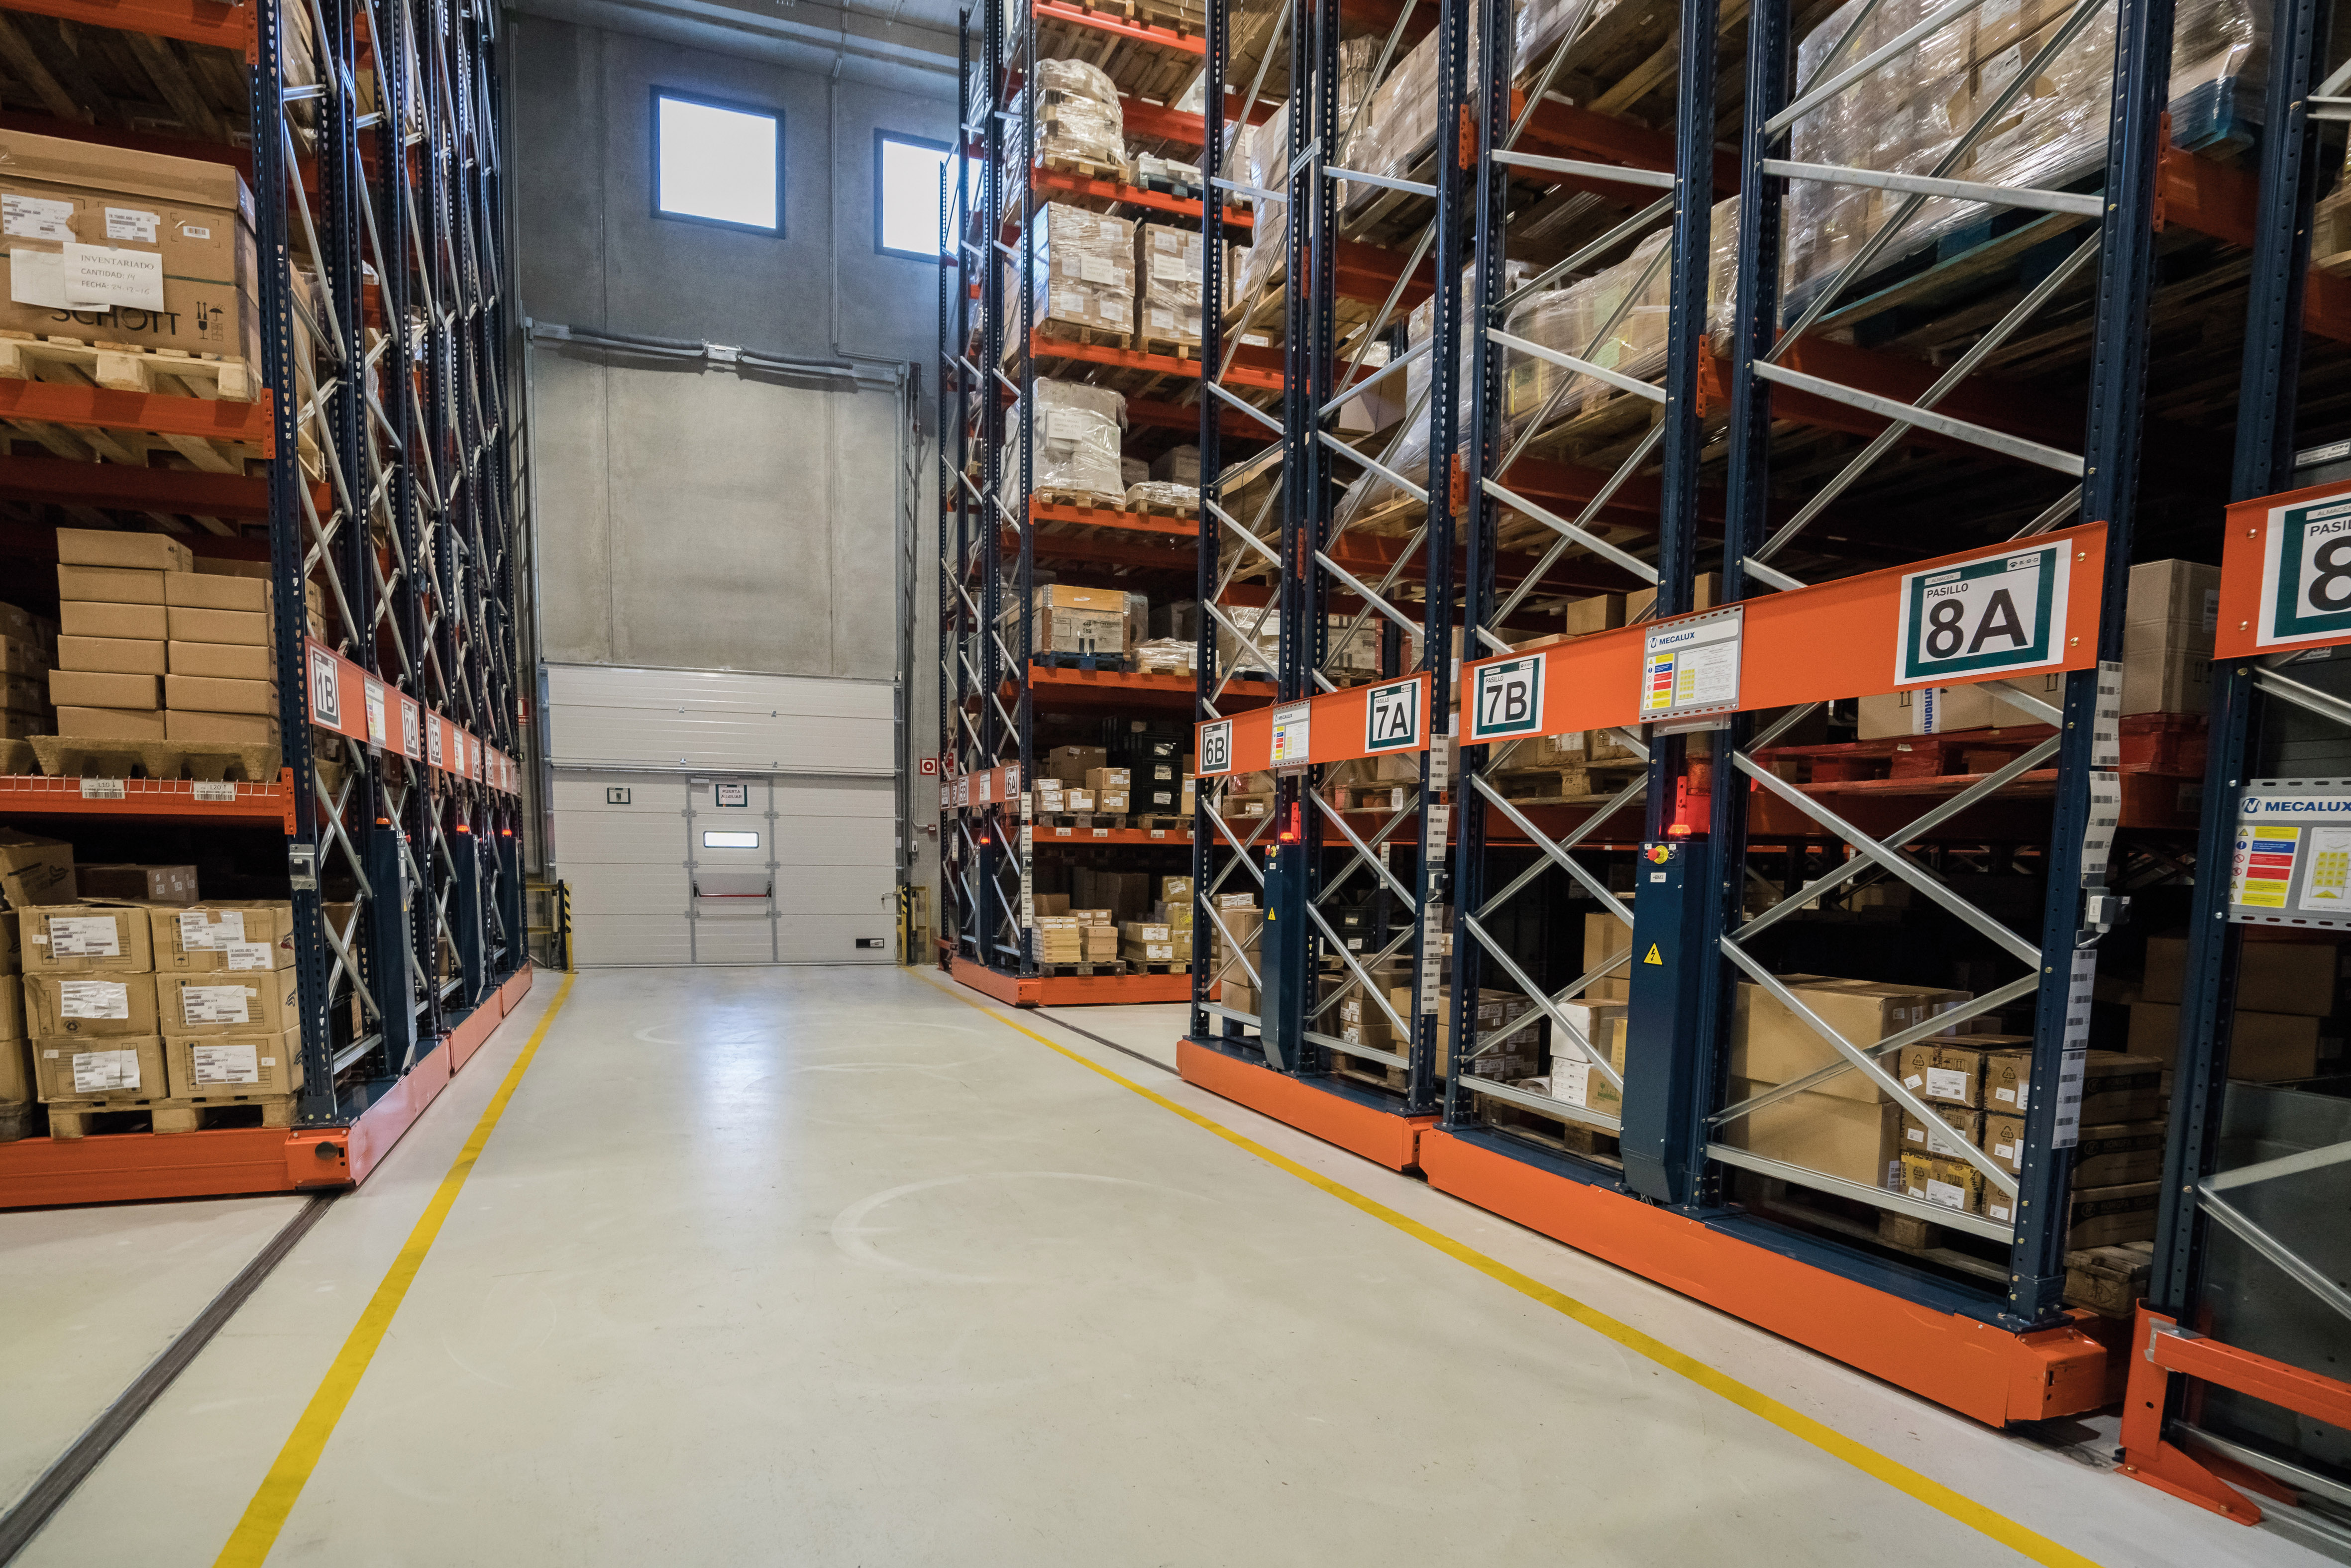 Movirack mobile racking eliminates aisles, while also facilitating direct access to the SKUs